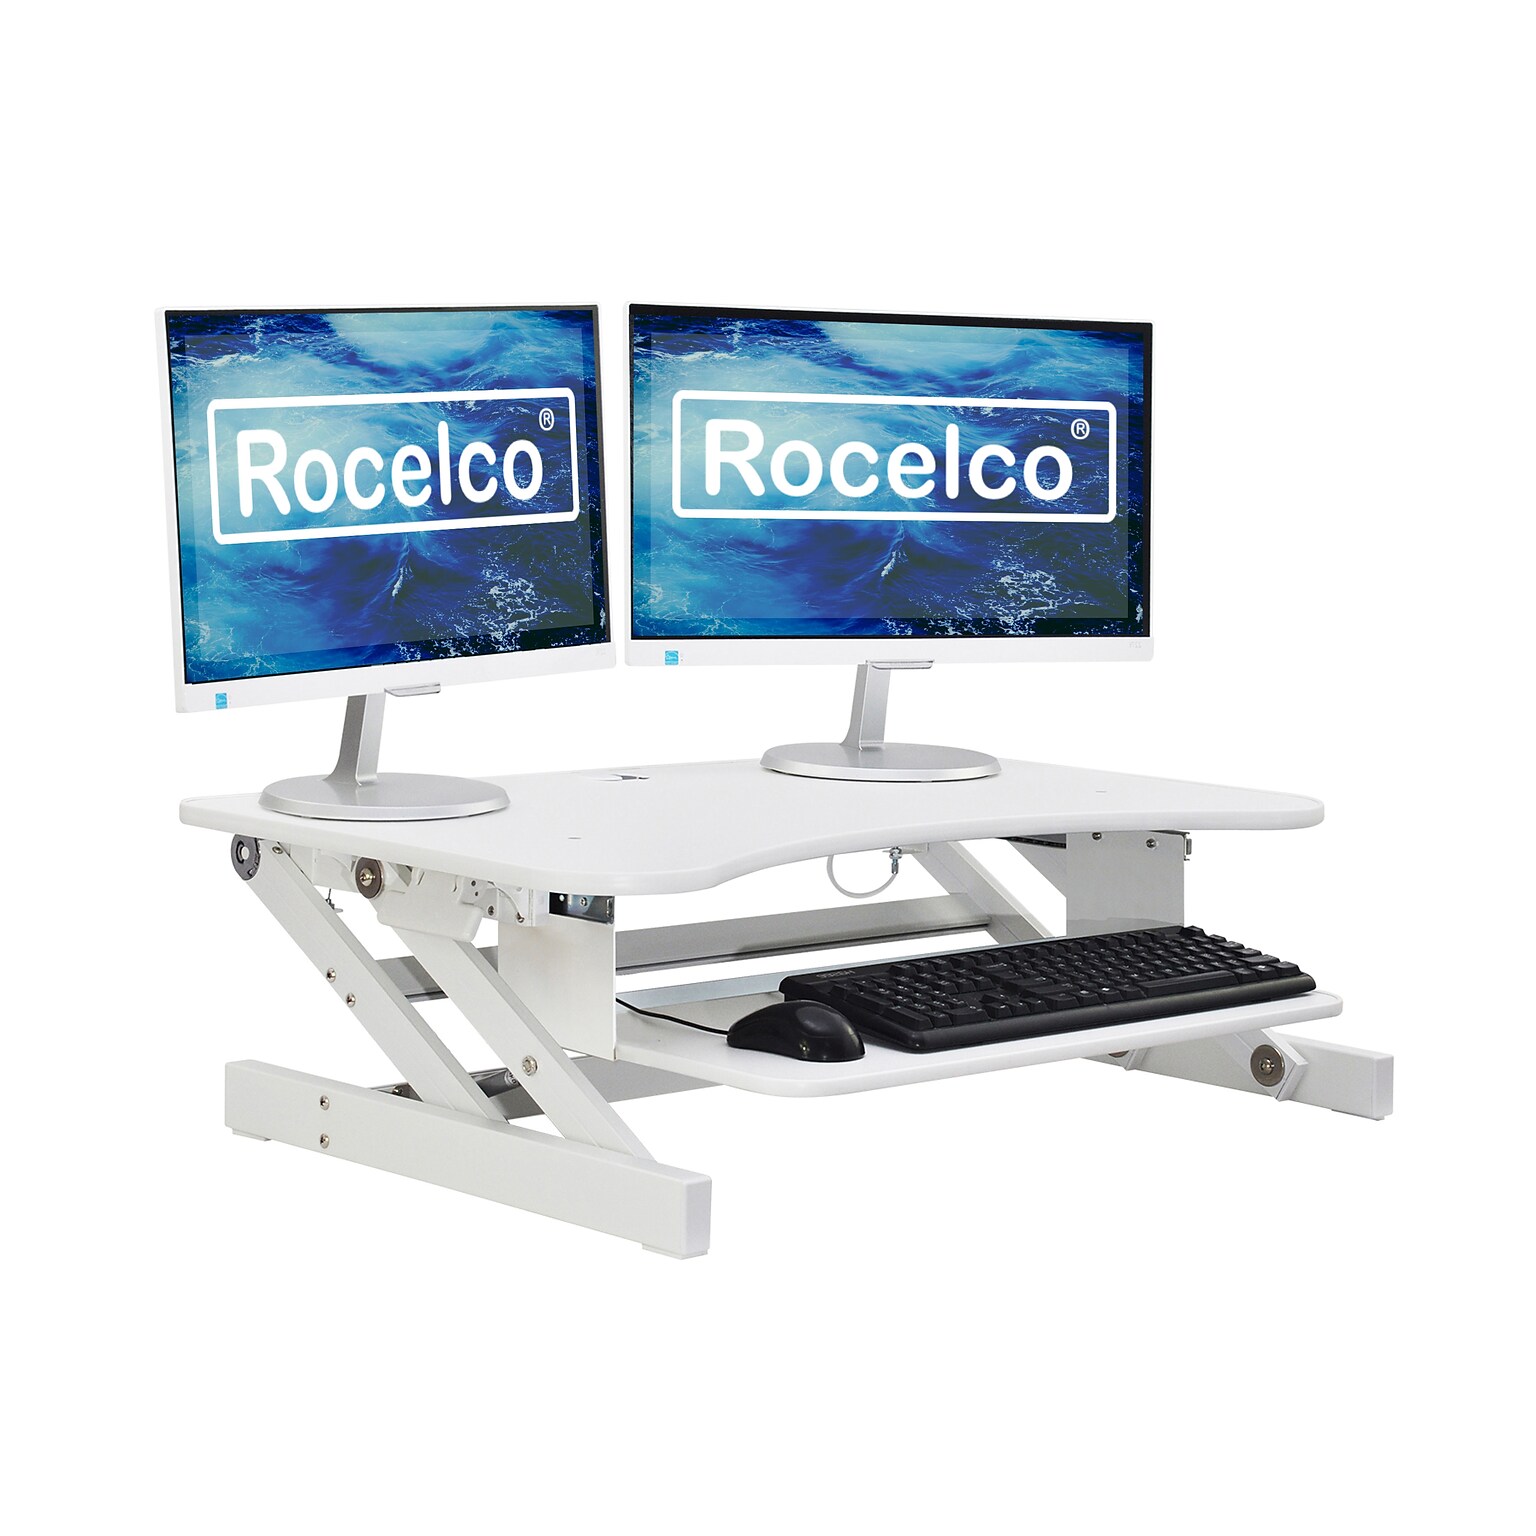 Rocelco 37.5 Height Adjustable Standing Desk Converter, Sit Stand Up Retractable Keyboard Riser, White (R DADRW)